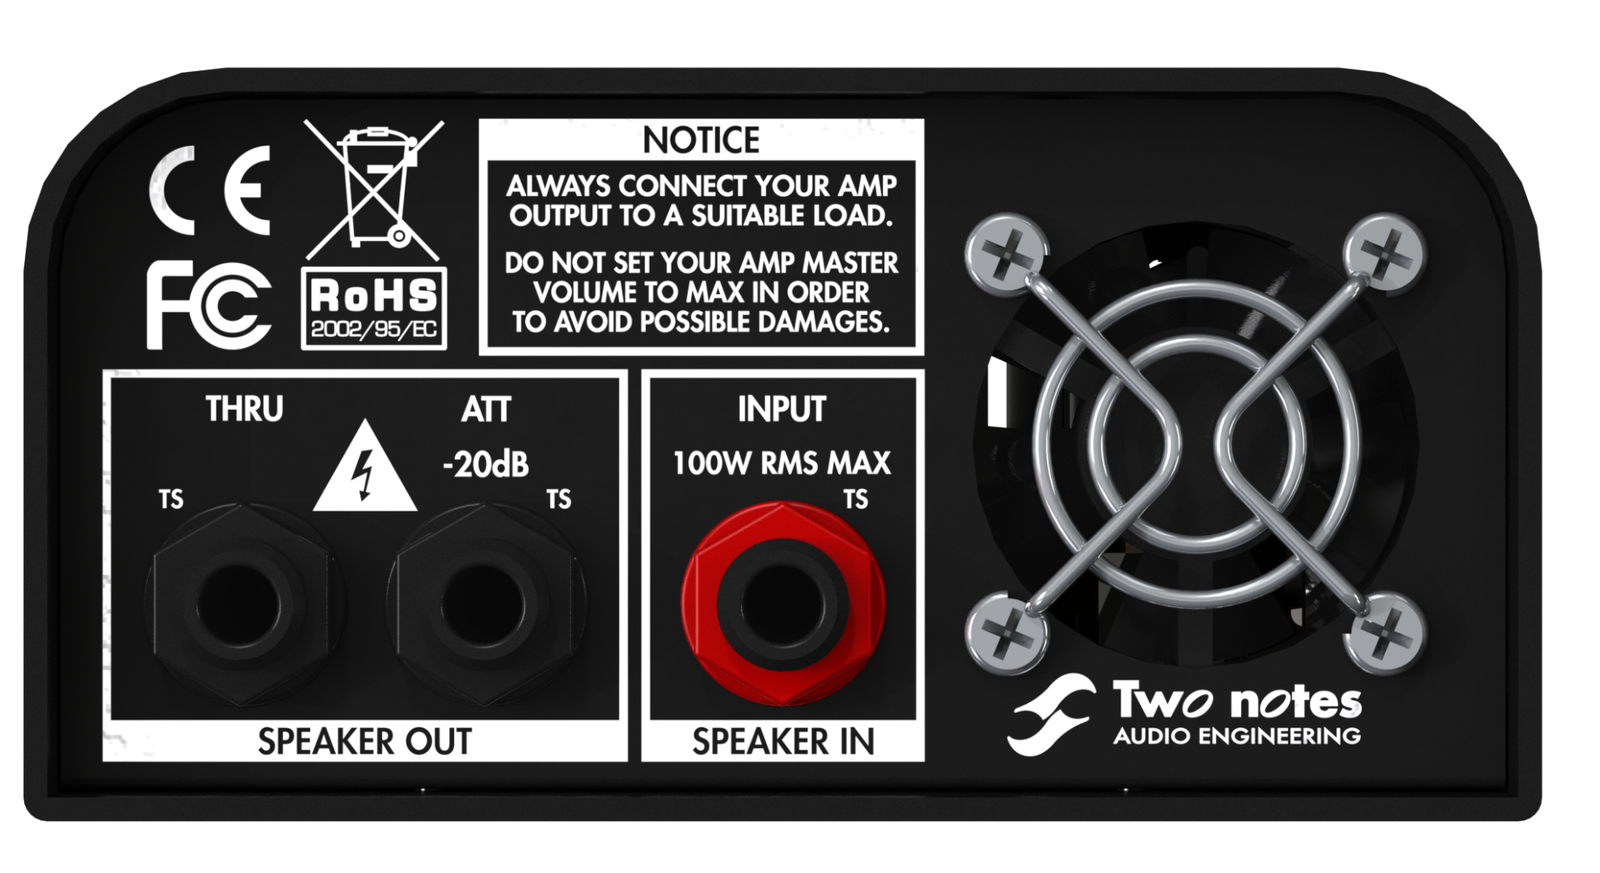 Two Notes - Captor 16ohm